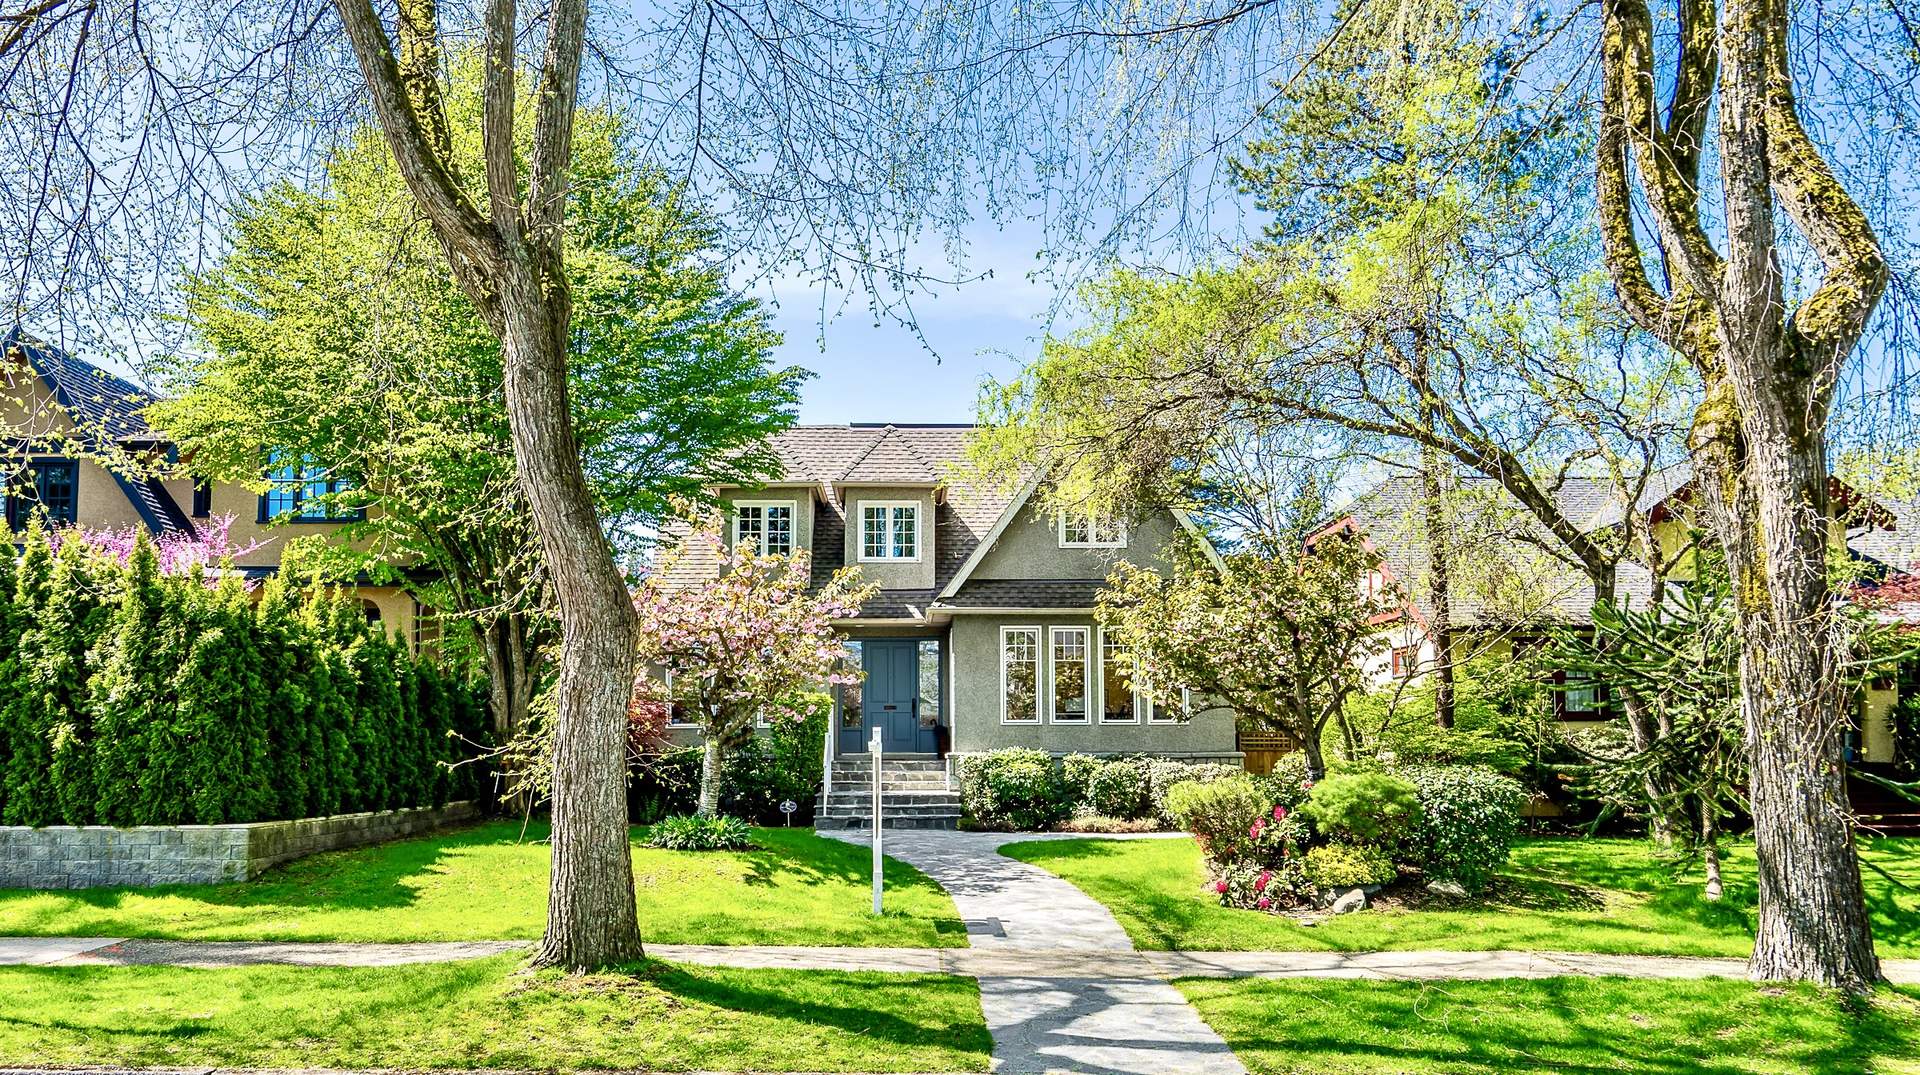  A Gorgeous Shaughnessy Family Residence!